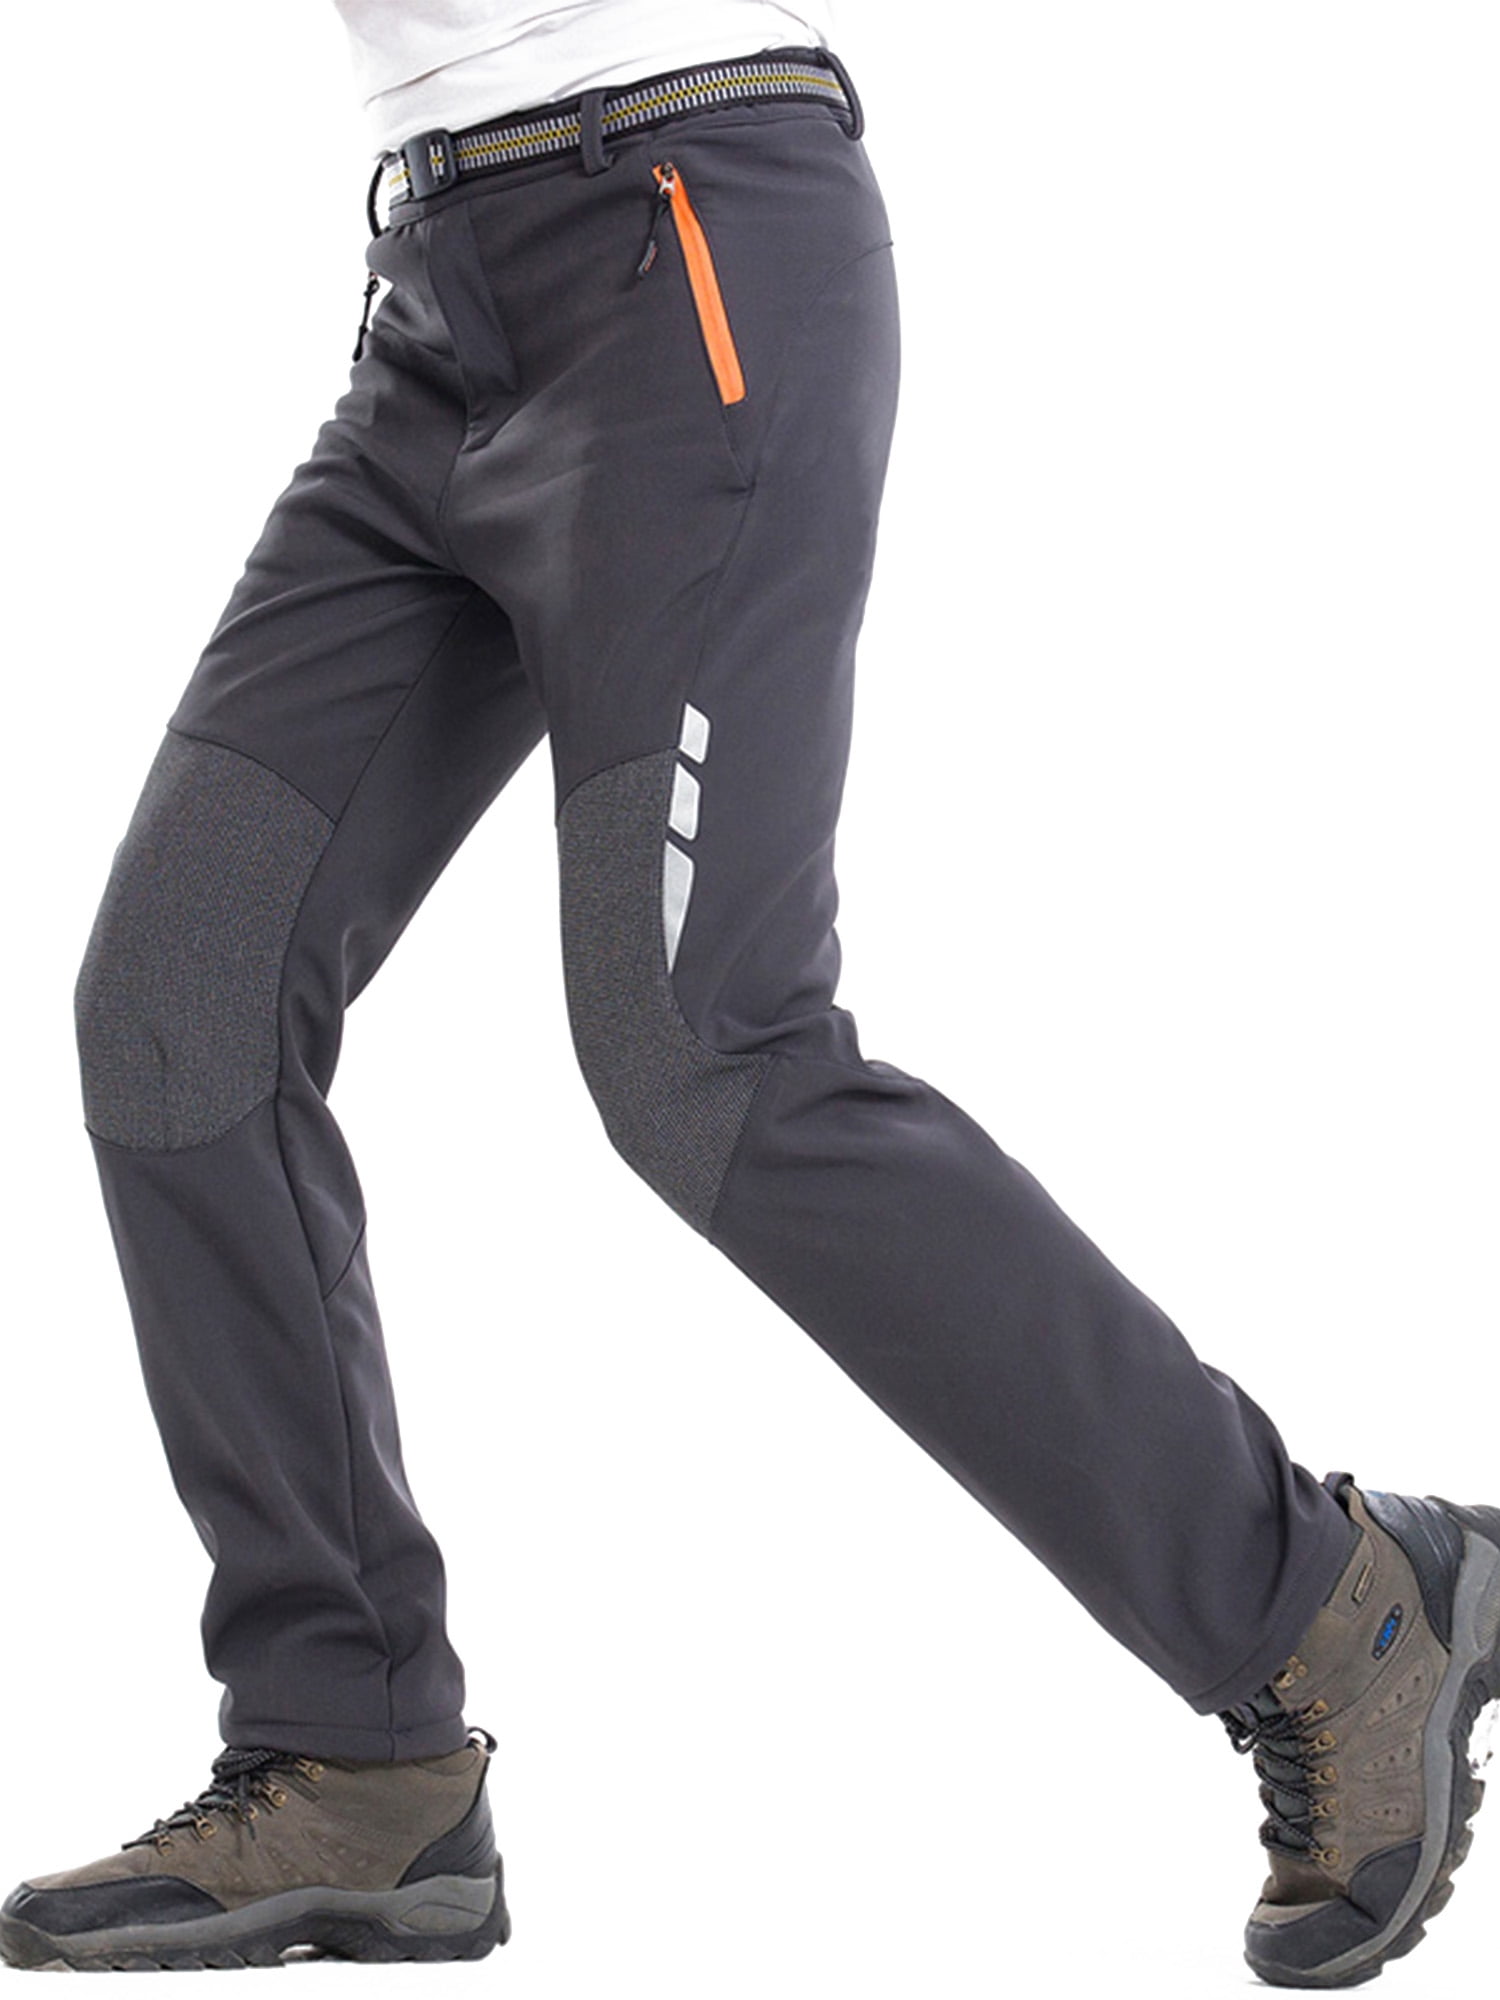 CRYSULLY Men's Tactical Pants-Ski Trousers Hiking Snow Soft Shell Fleece Lined Pants No Belt